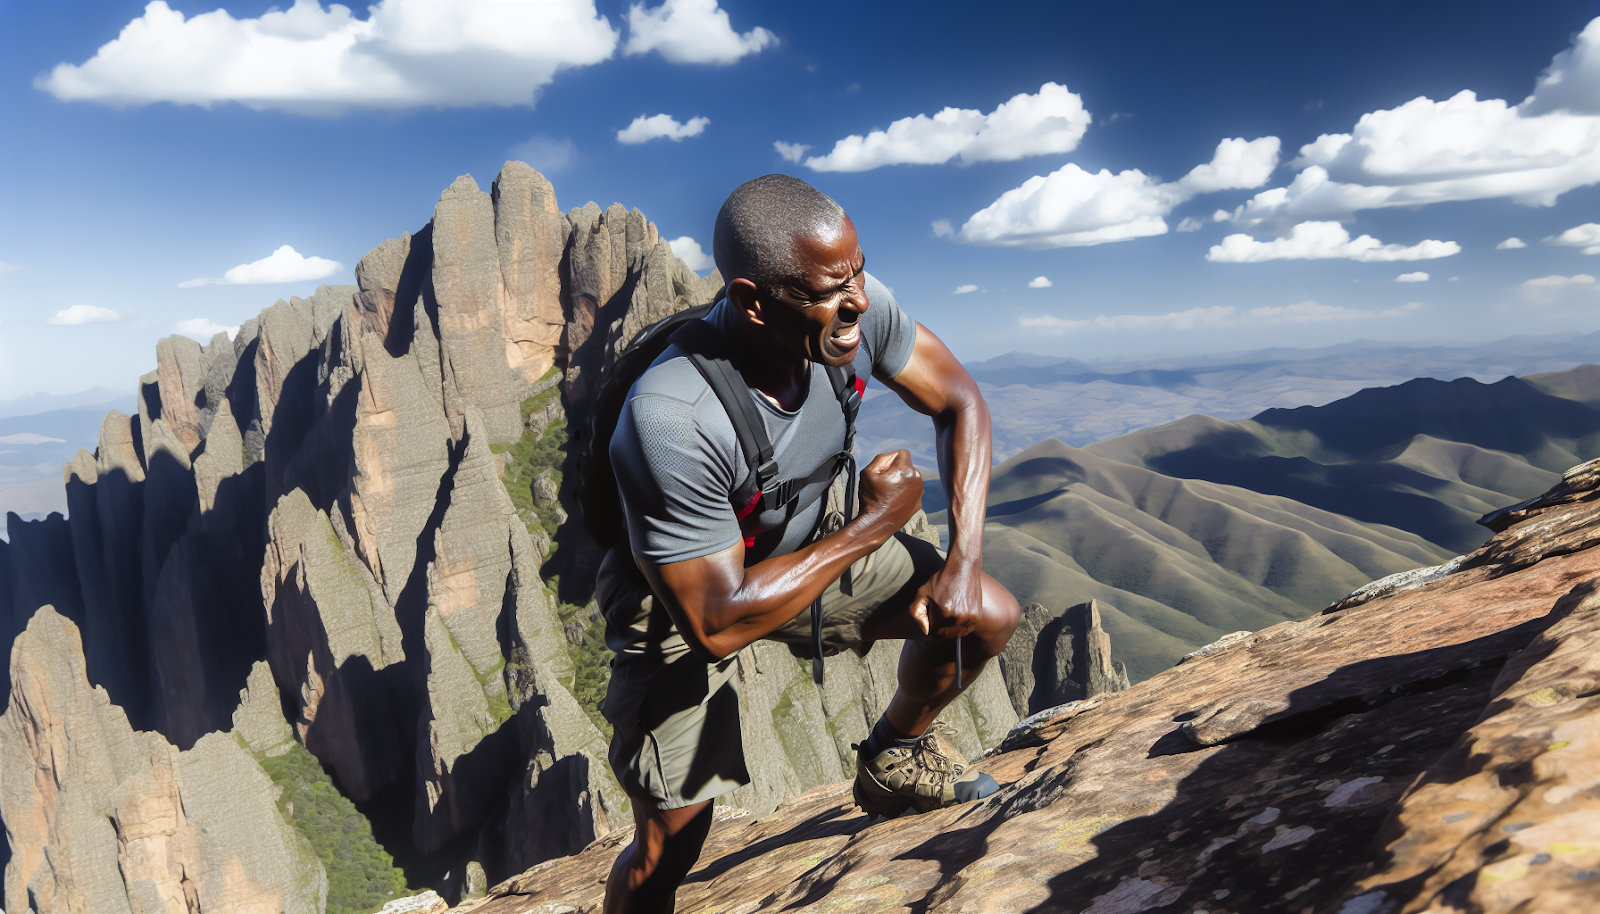 A person climbing a mountain, symbolizing overcoming obstacles and embracing change